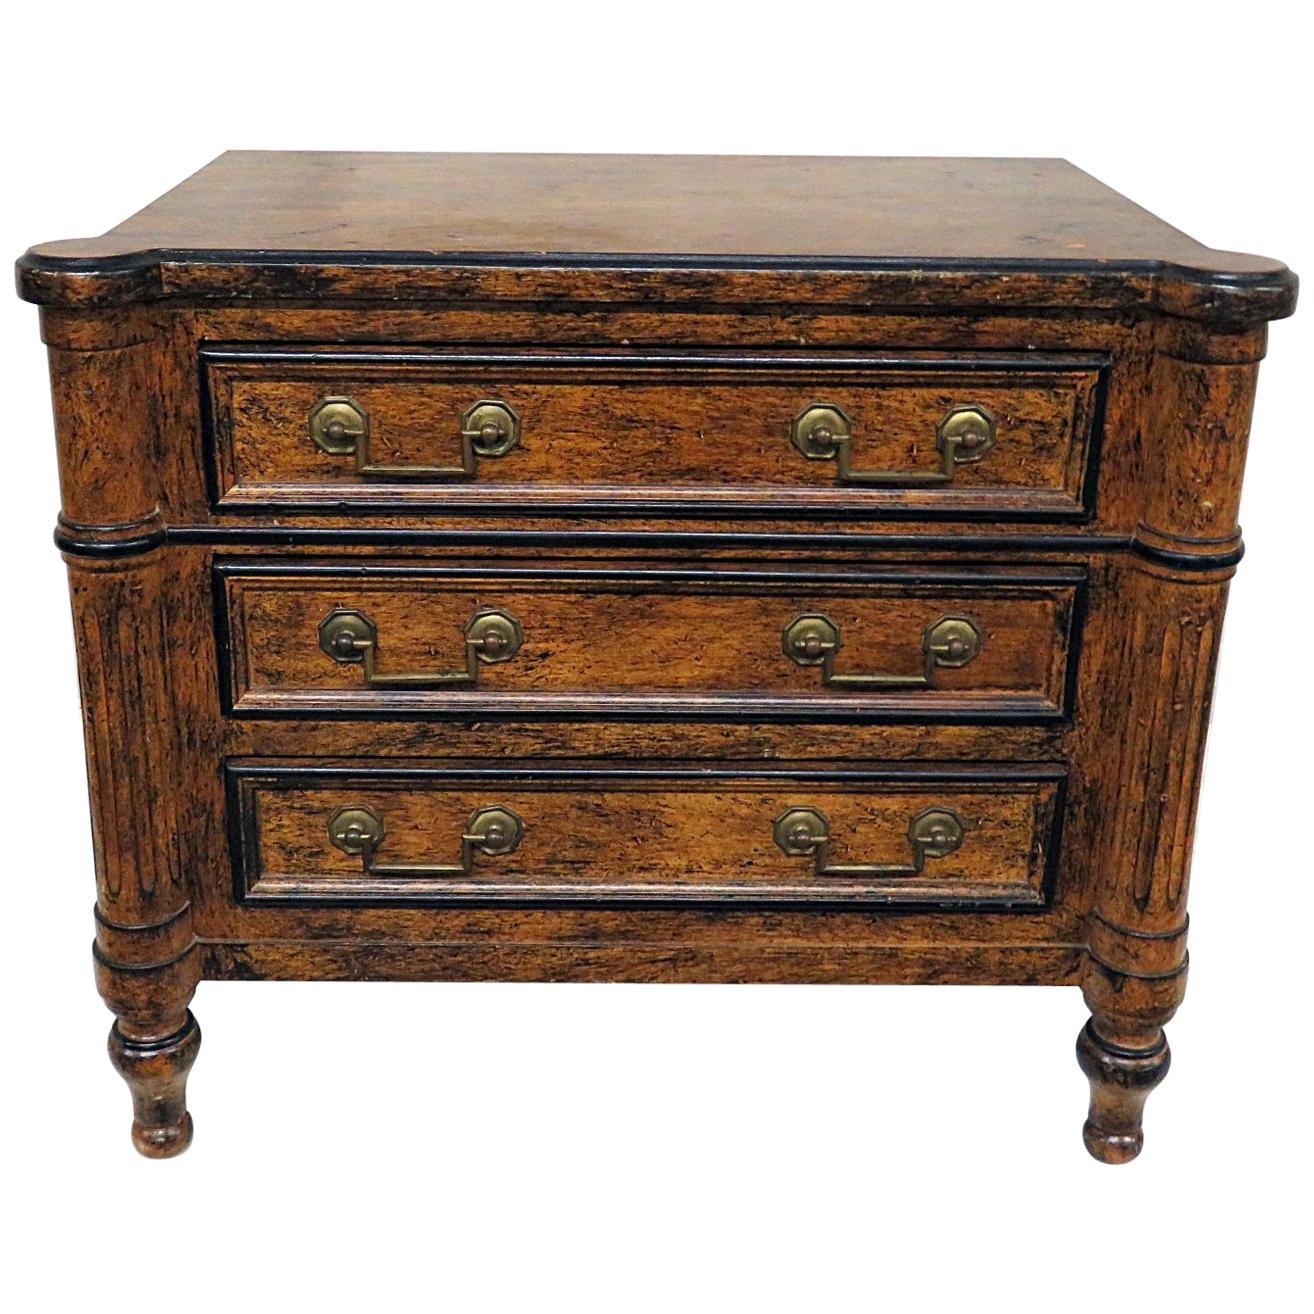 French Paint Decorated Directoire Petite Commode Jewelry Chest by Lewis Mittman For Sale